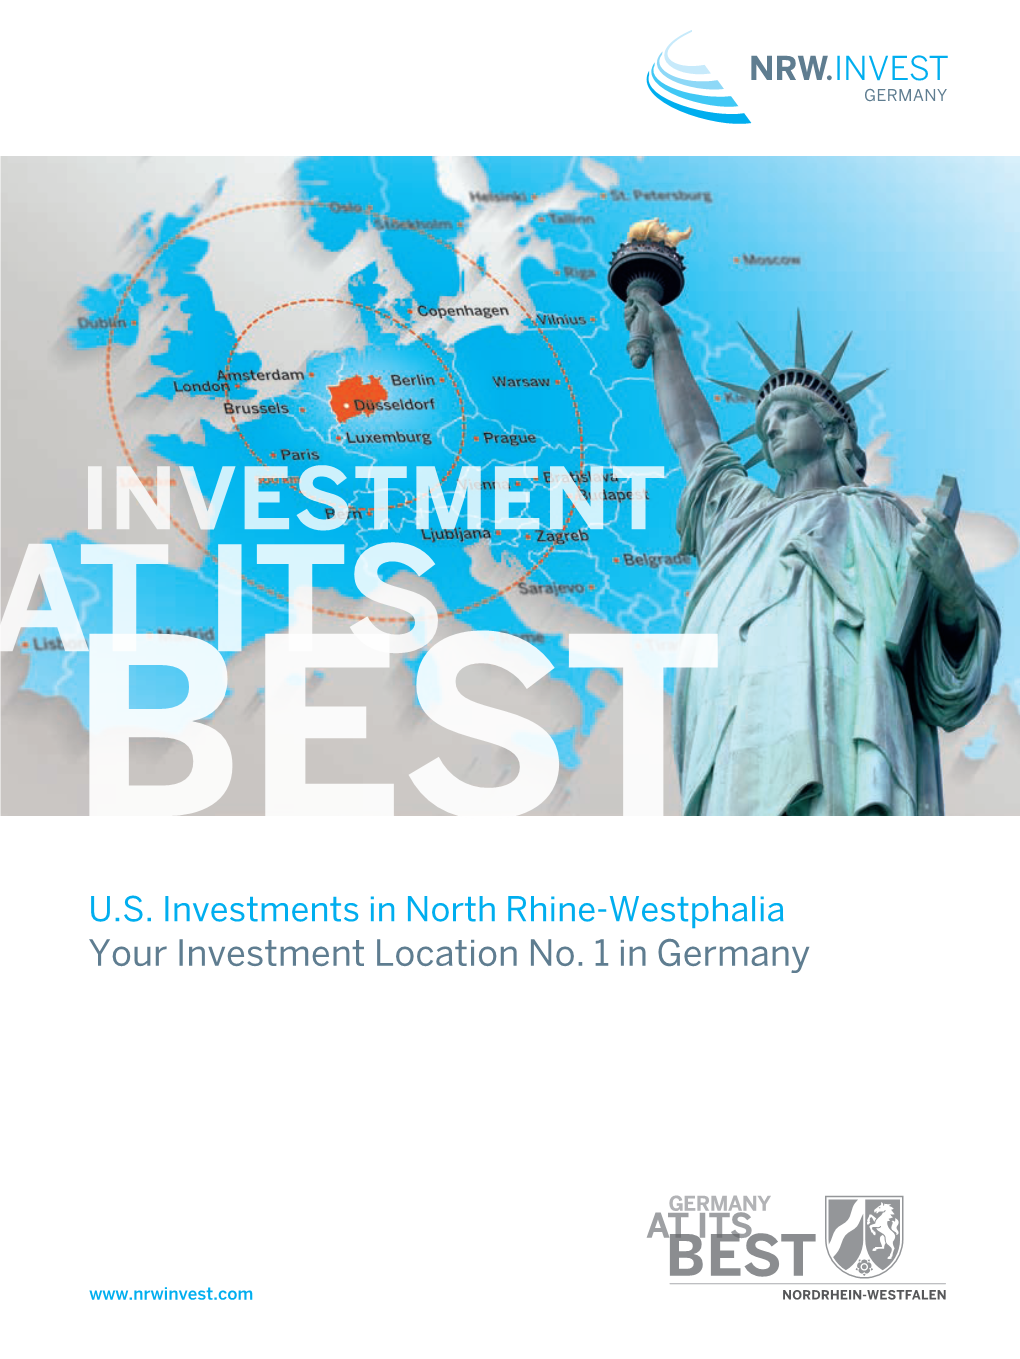 Your Investment Location No. 1 in Germany